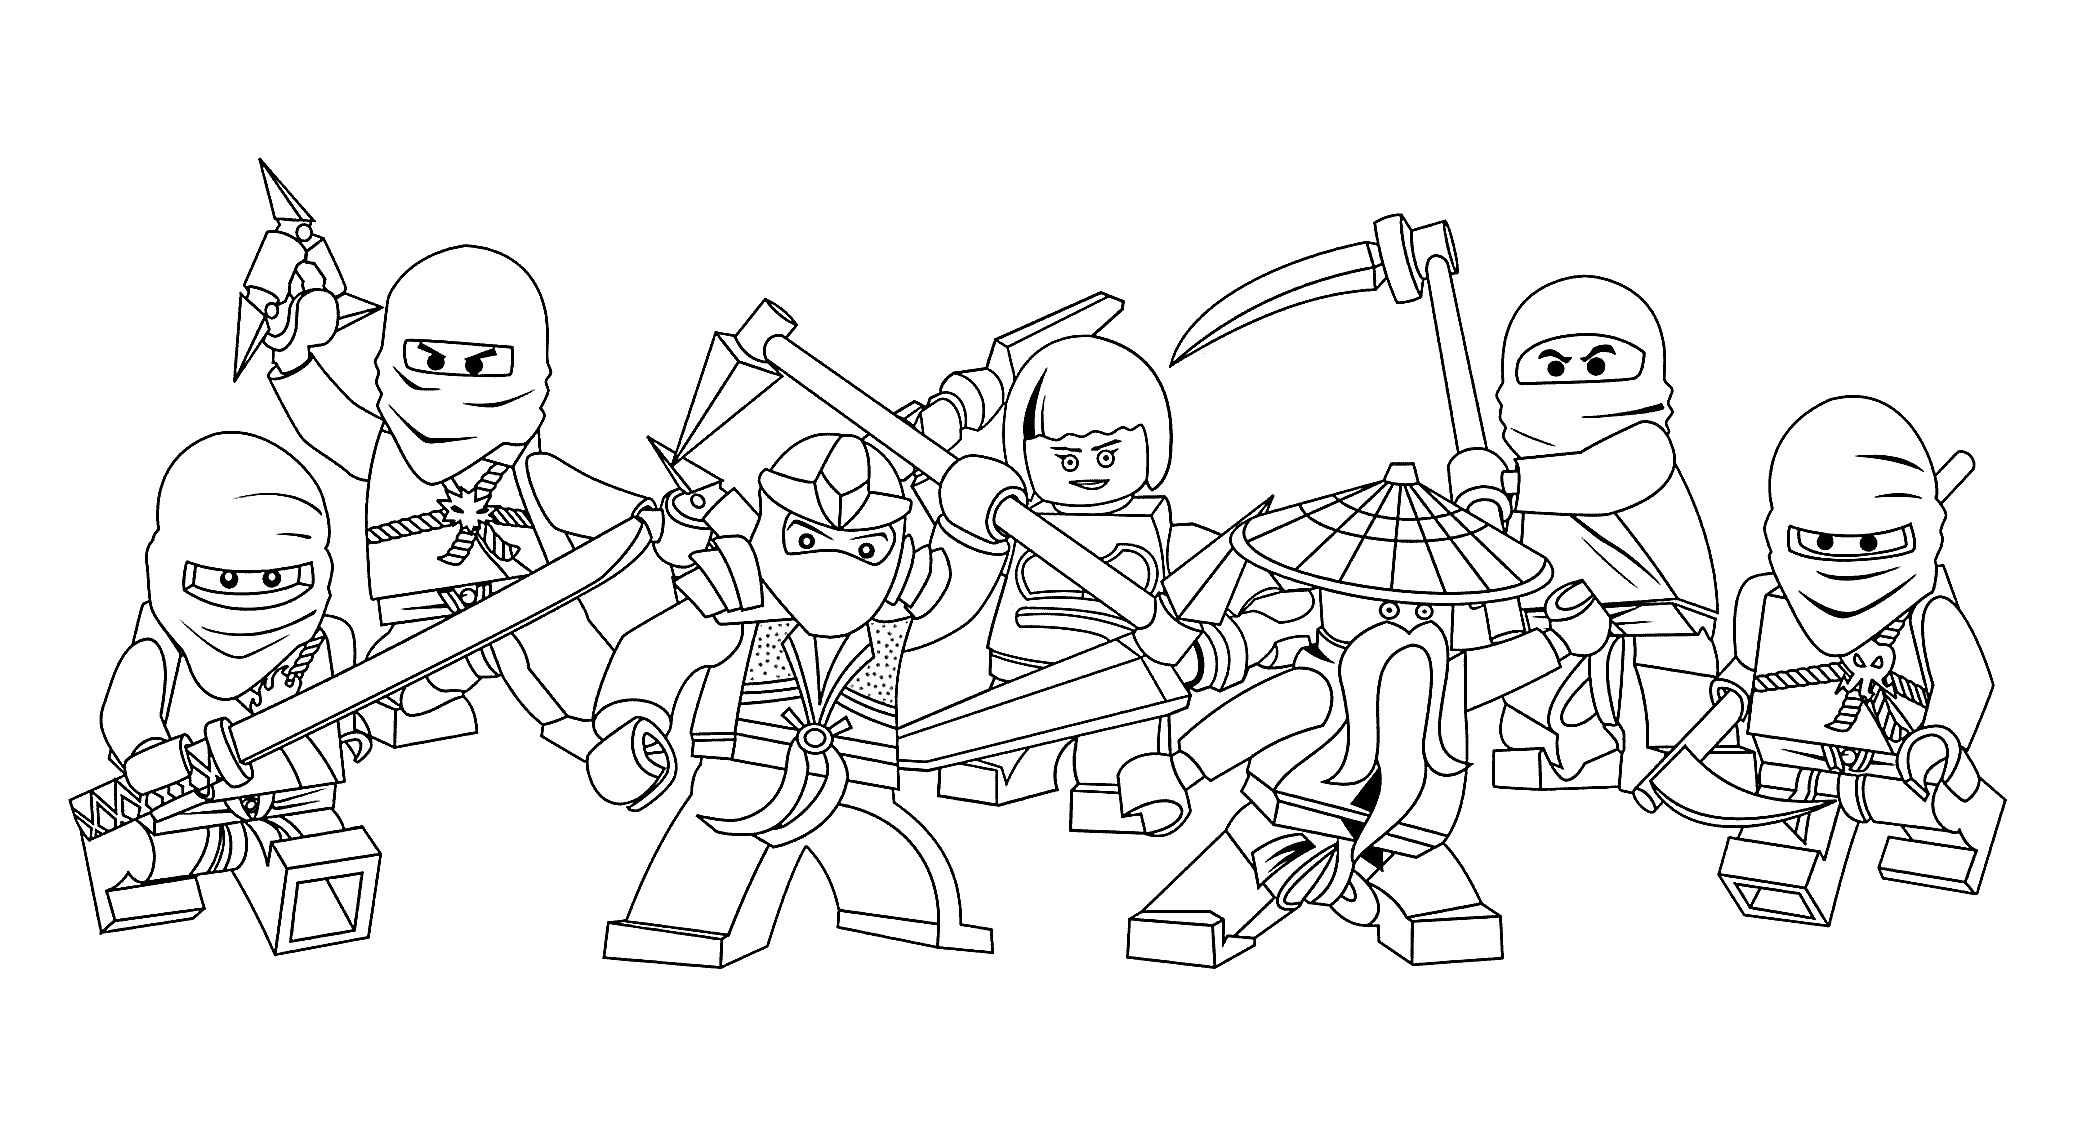 Lego Ninjago Printable Coloring Pages   Free Coloring Pages ...